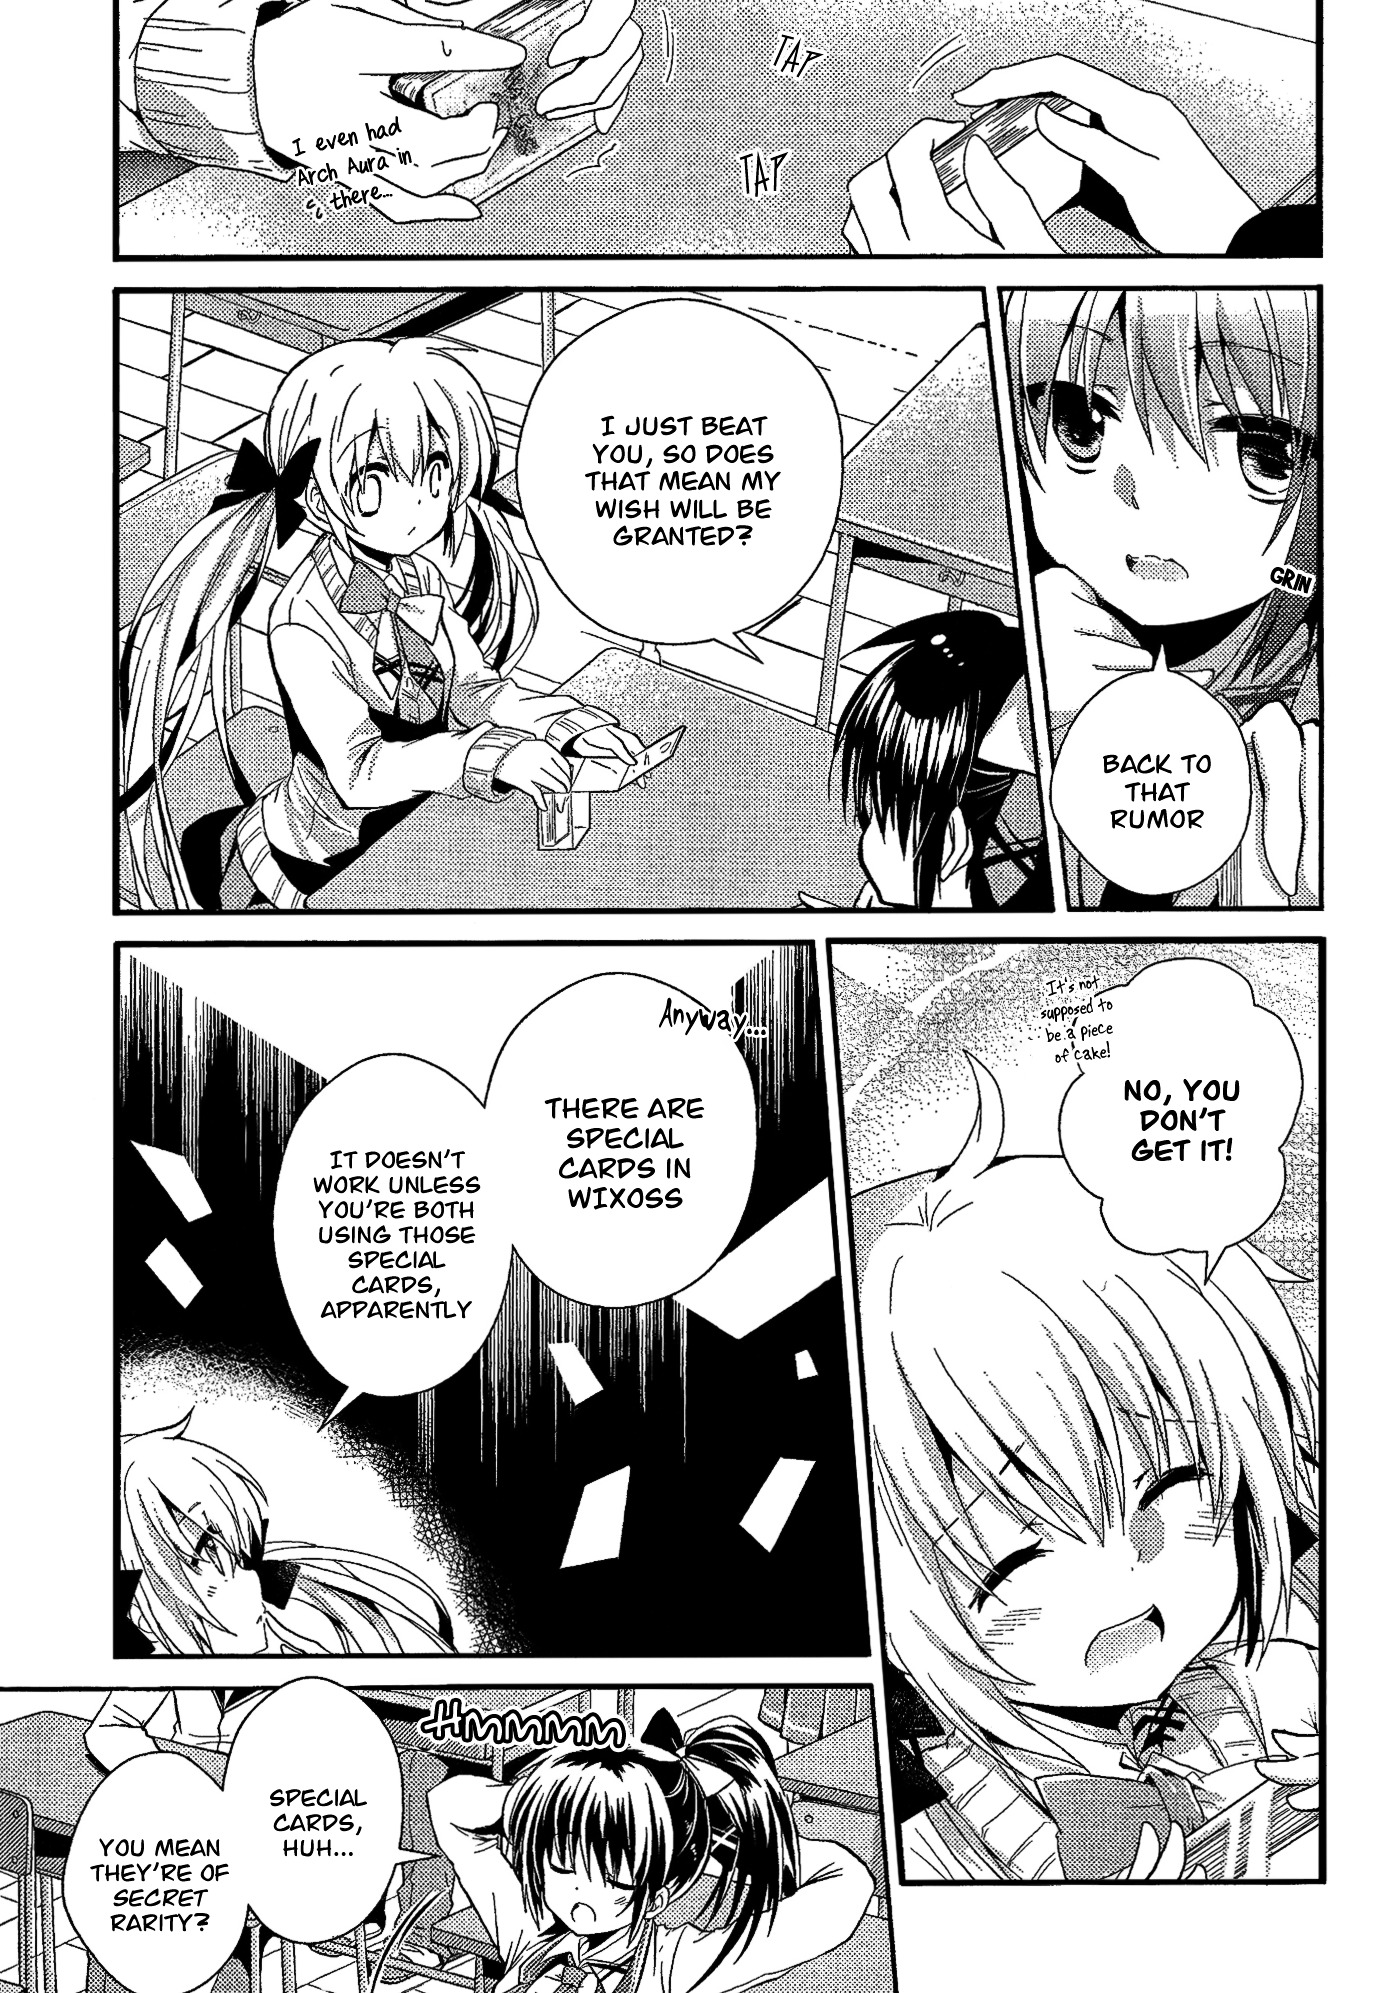 Selector Infected Wixoss - Re/verse - Chapter 1 #4